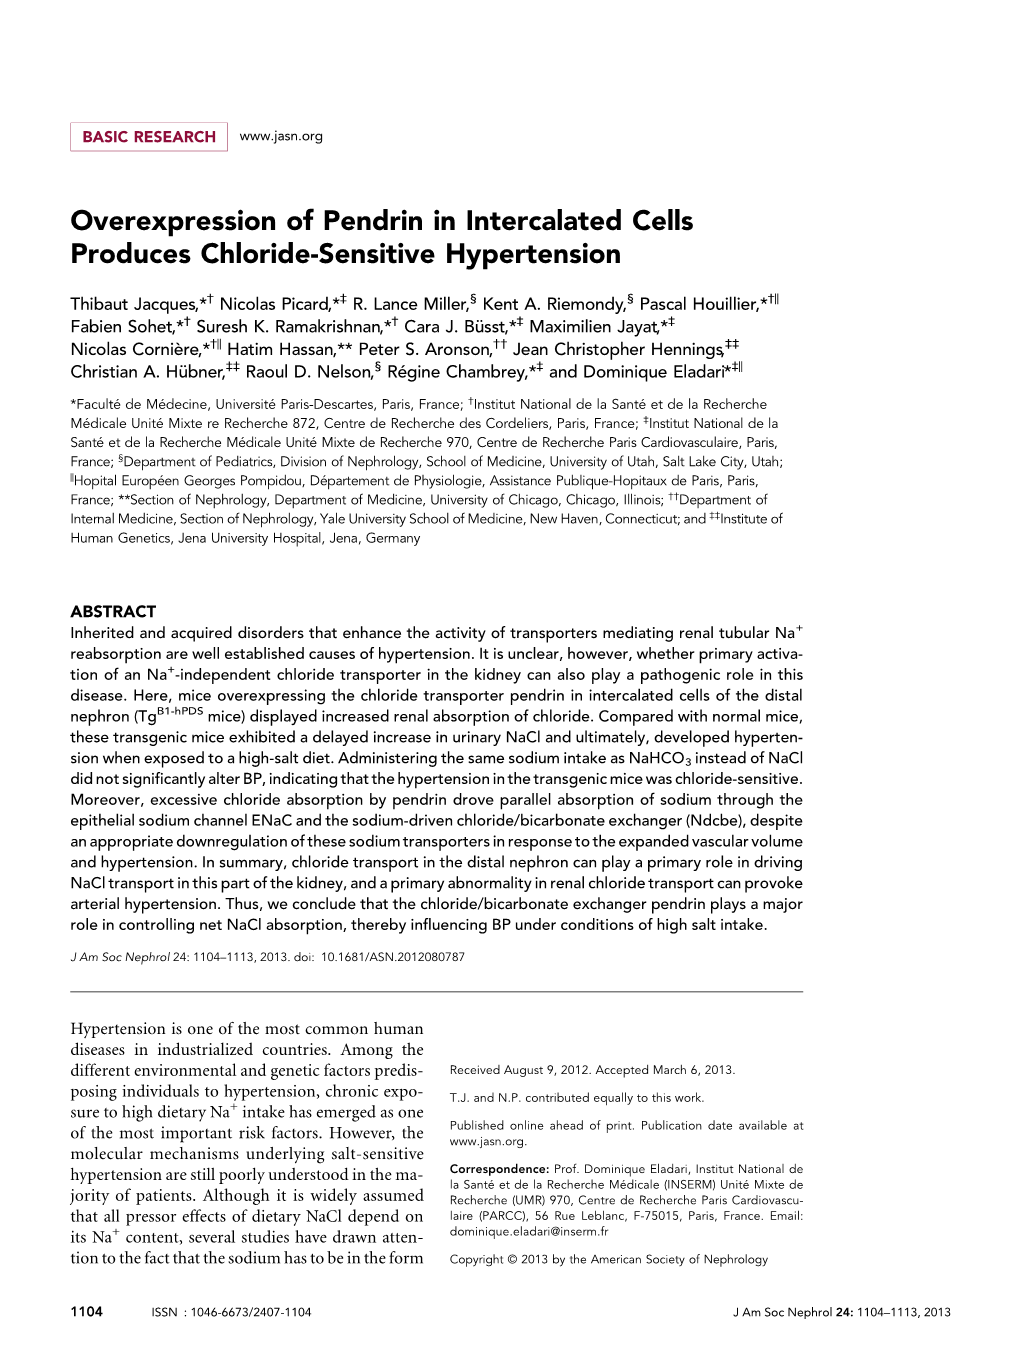 Overexpression of Pendrin in Intercalated Cells Produces Chloride-Sensitive Hypertension